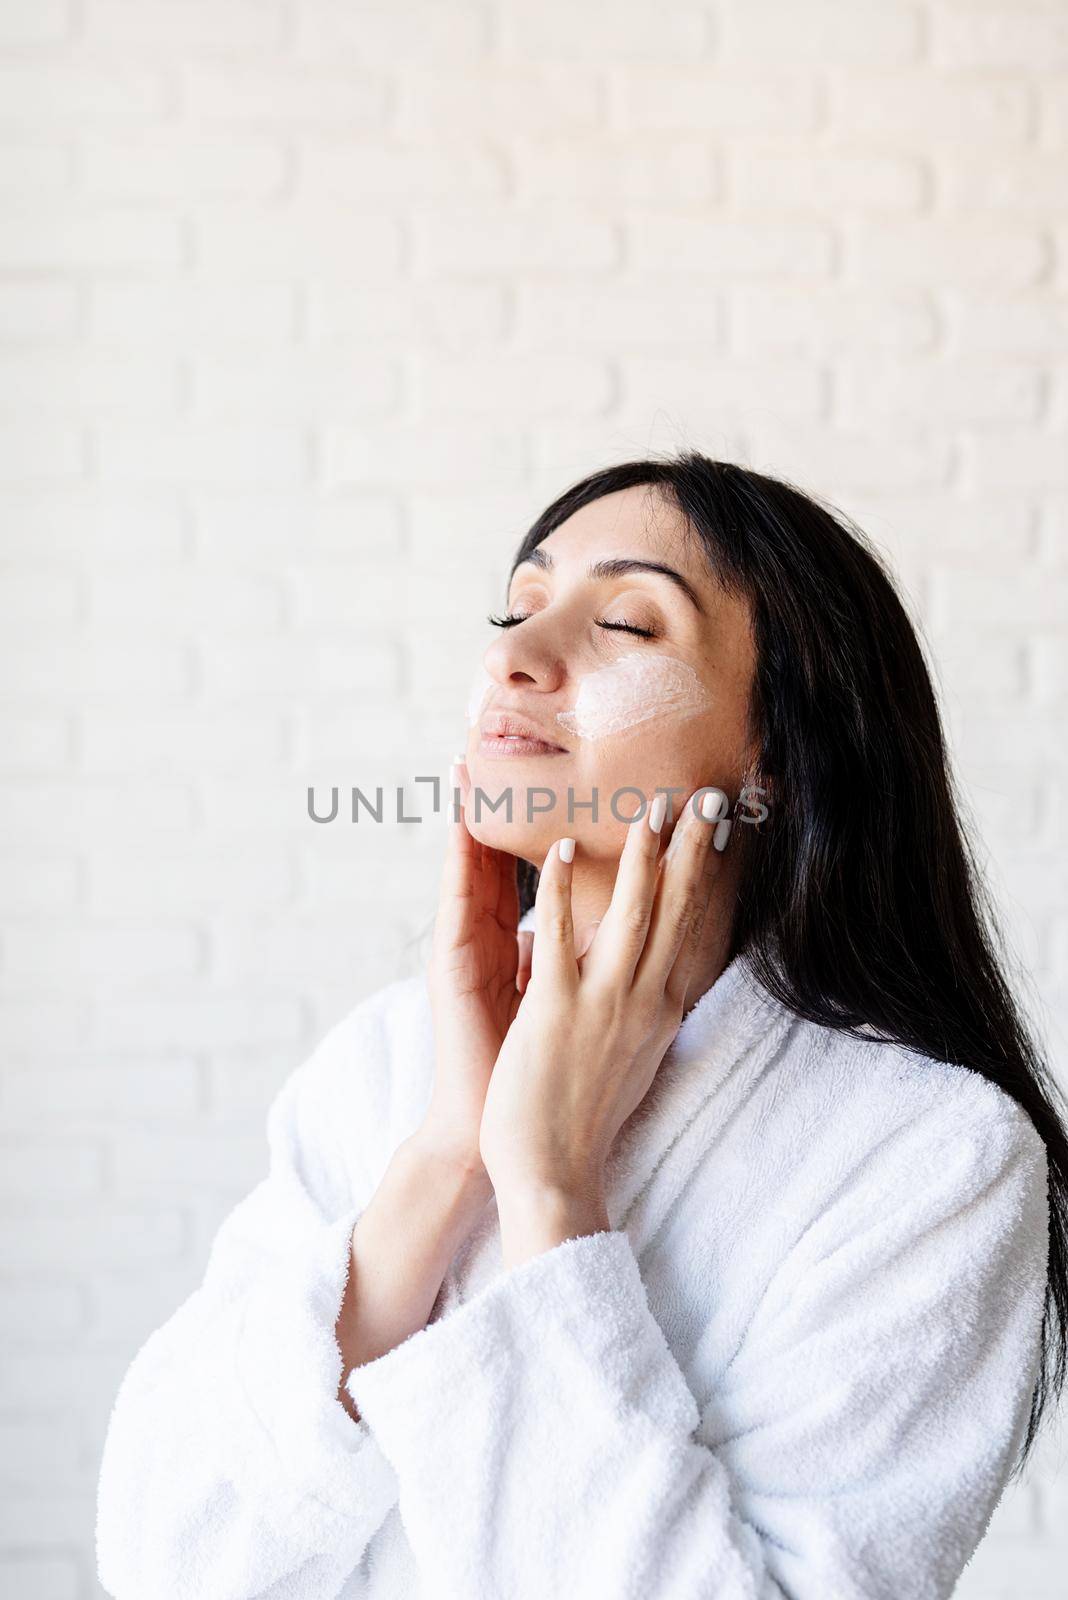 Spa and beauty. Happy beautiful middle eastern woman wearing bath towels applying facial cream on her face